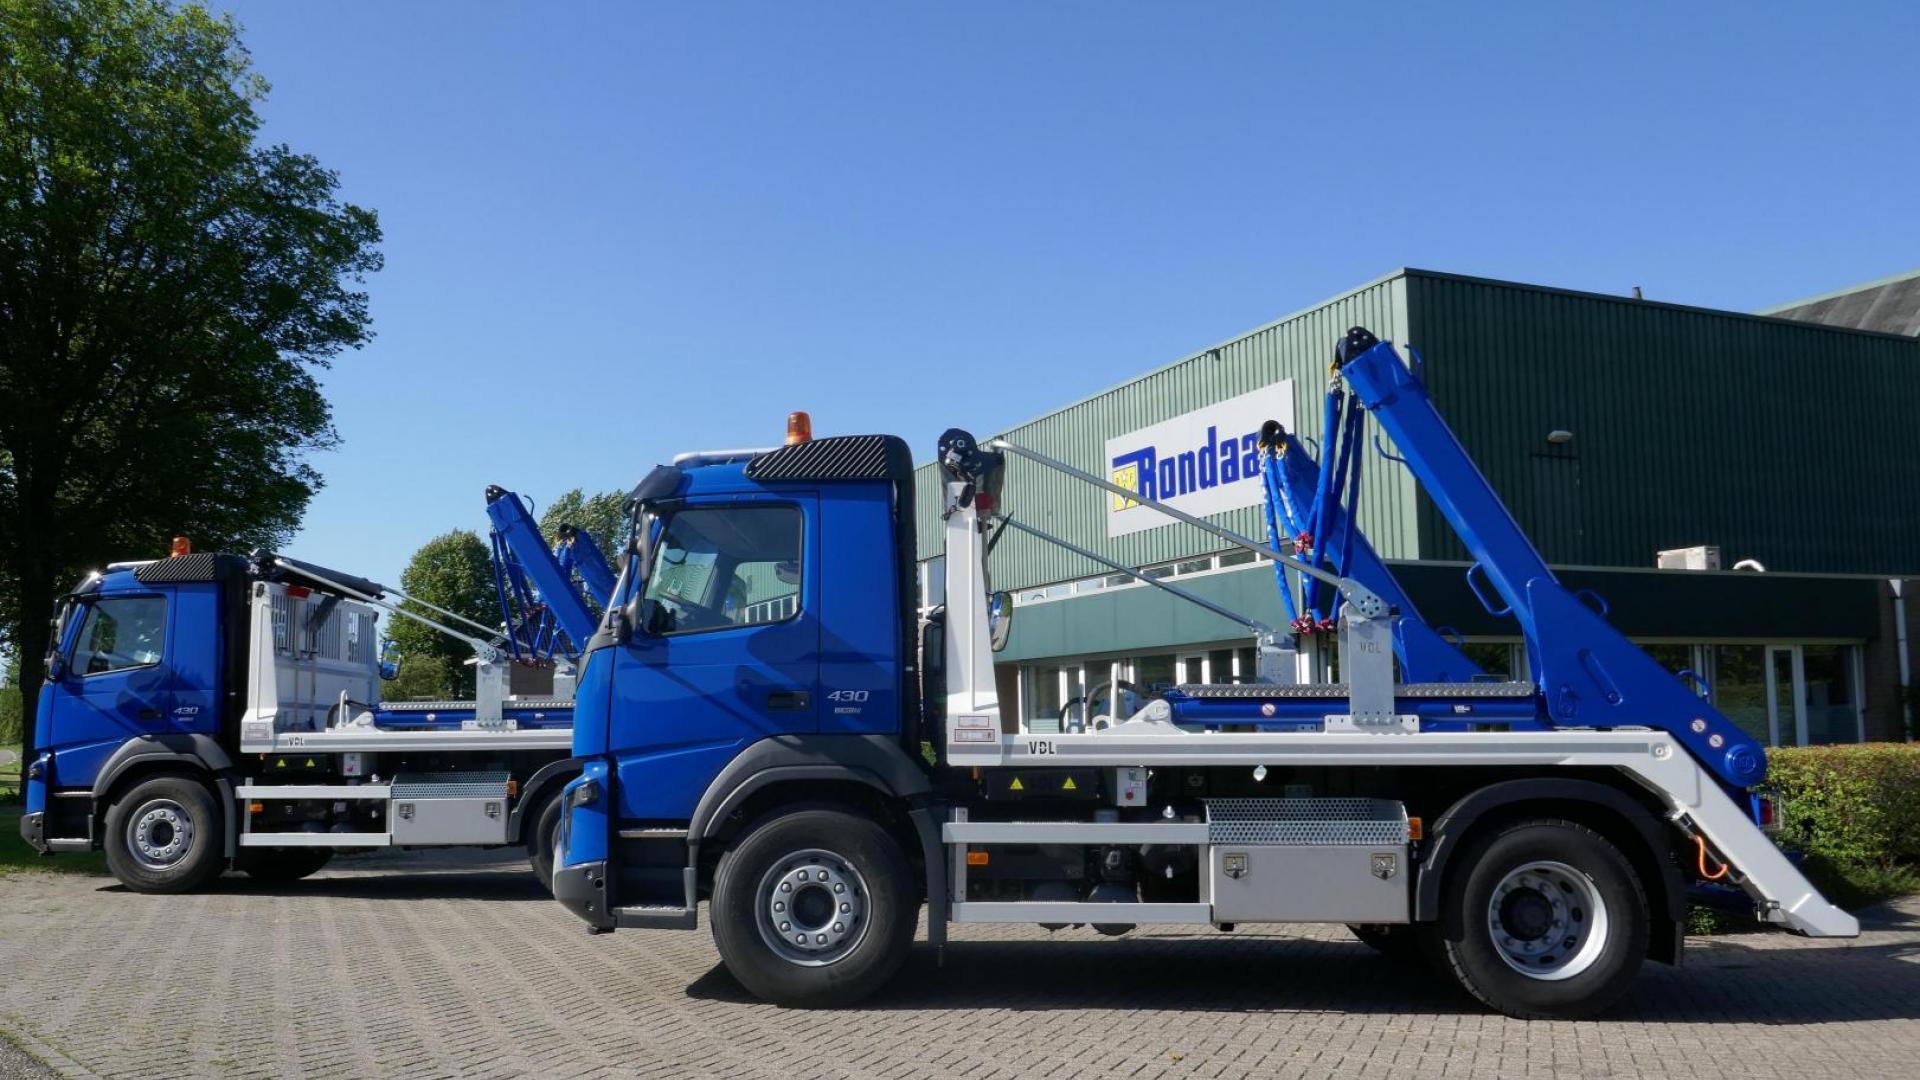 Rondaan delivers 2 Volvo trucks with skipload system to Renewi